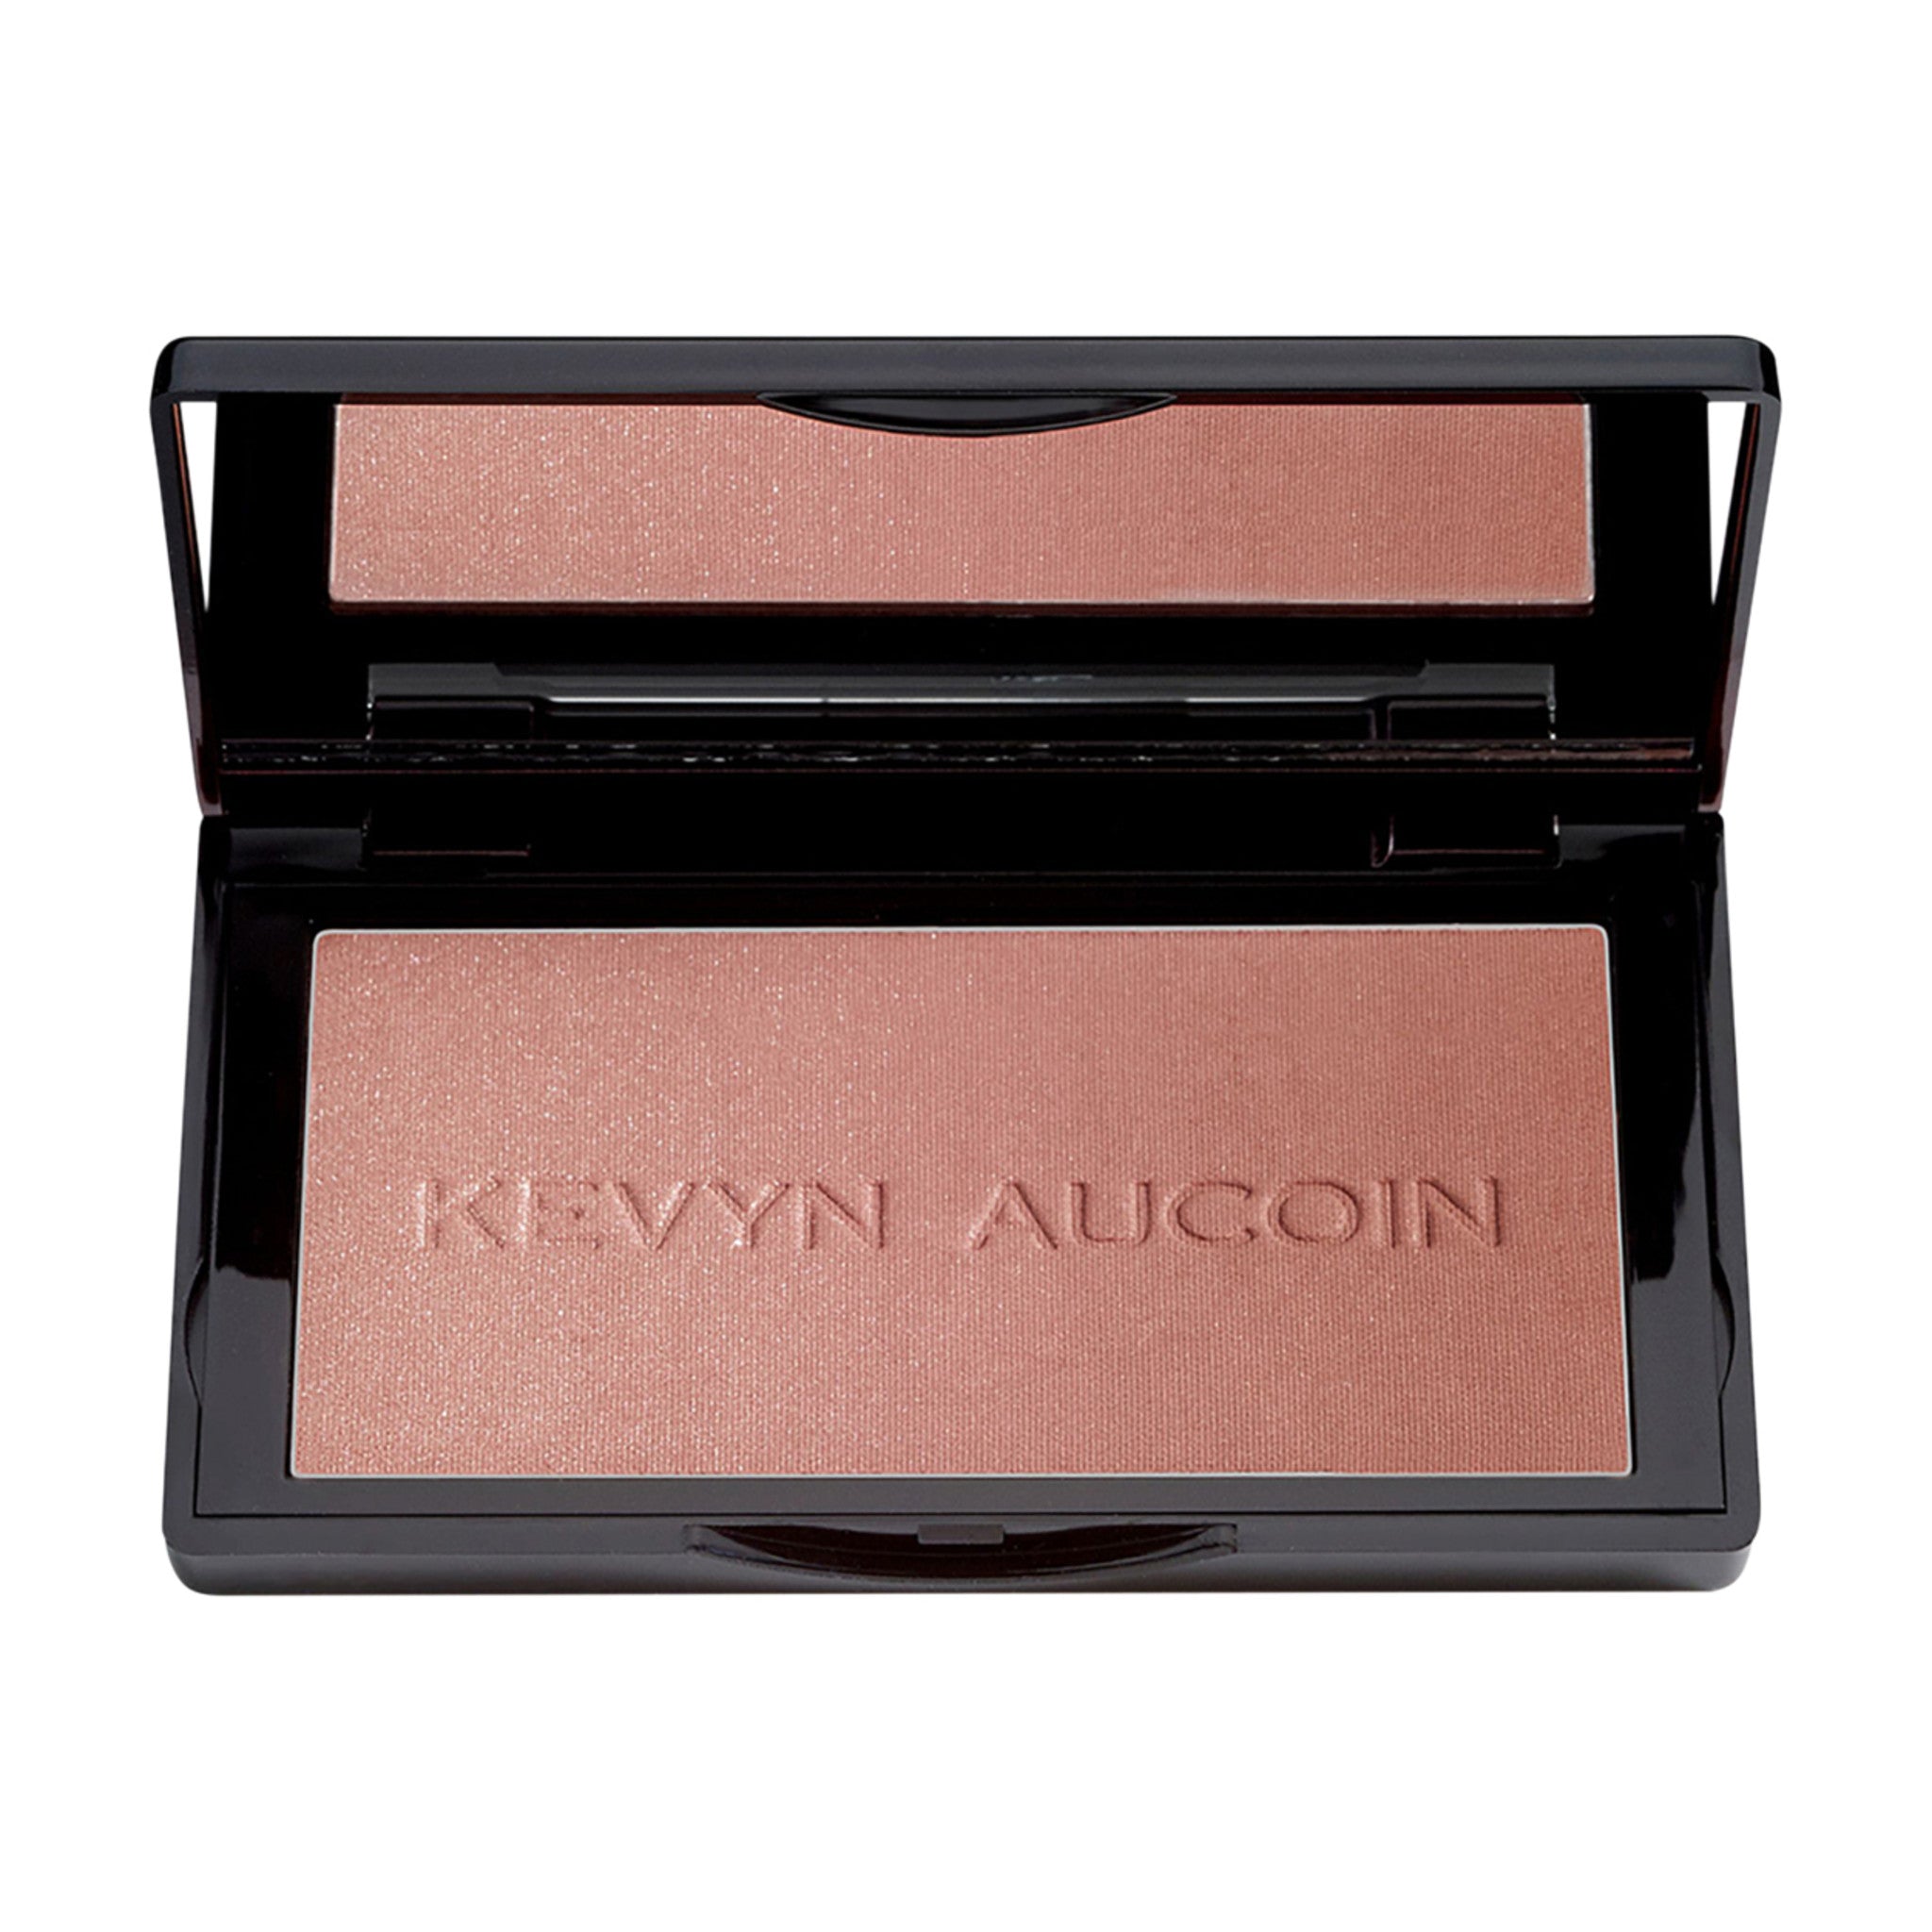 Kevyn Aucoin The Neo-Bronzer Color/Shade variant: Dusk Medium main image. This product is in the color bronze